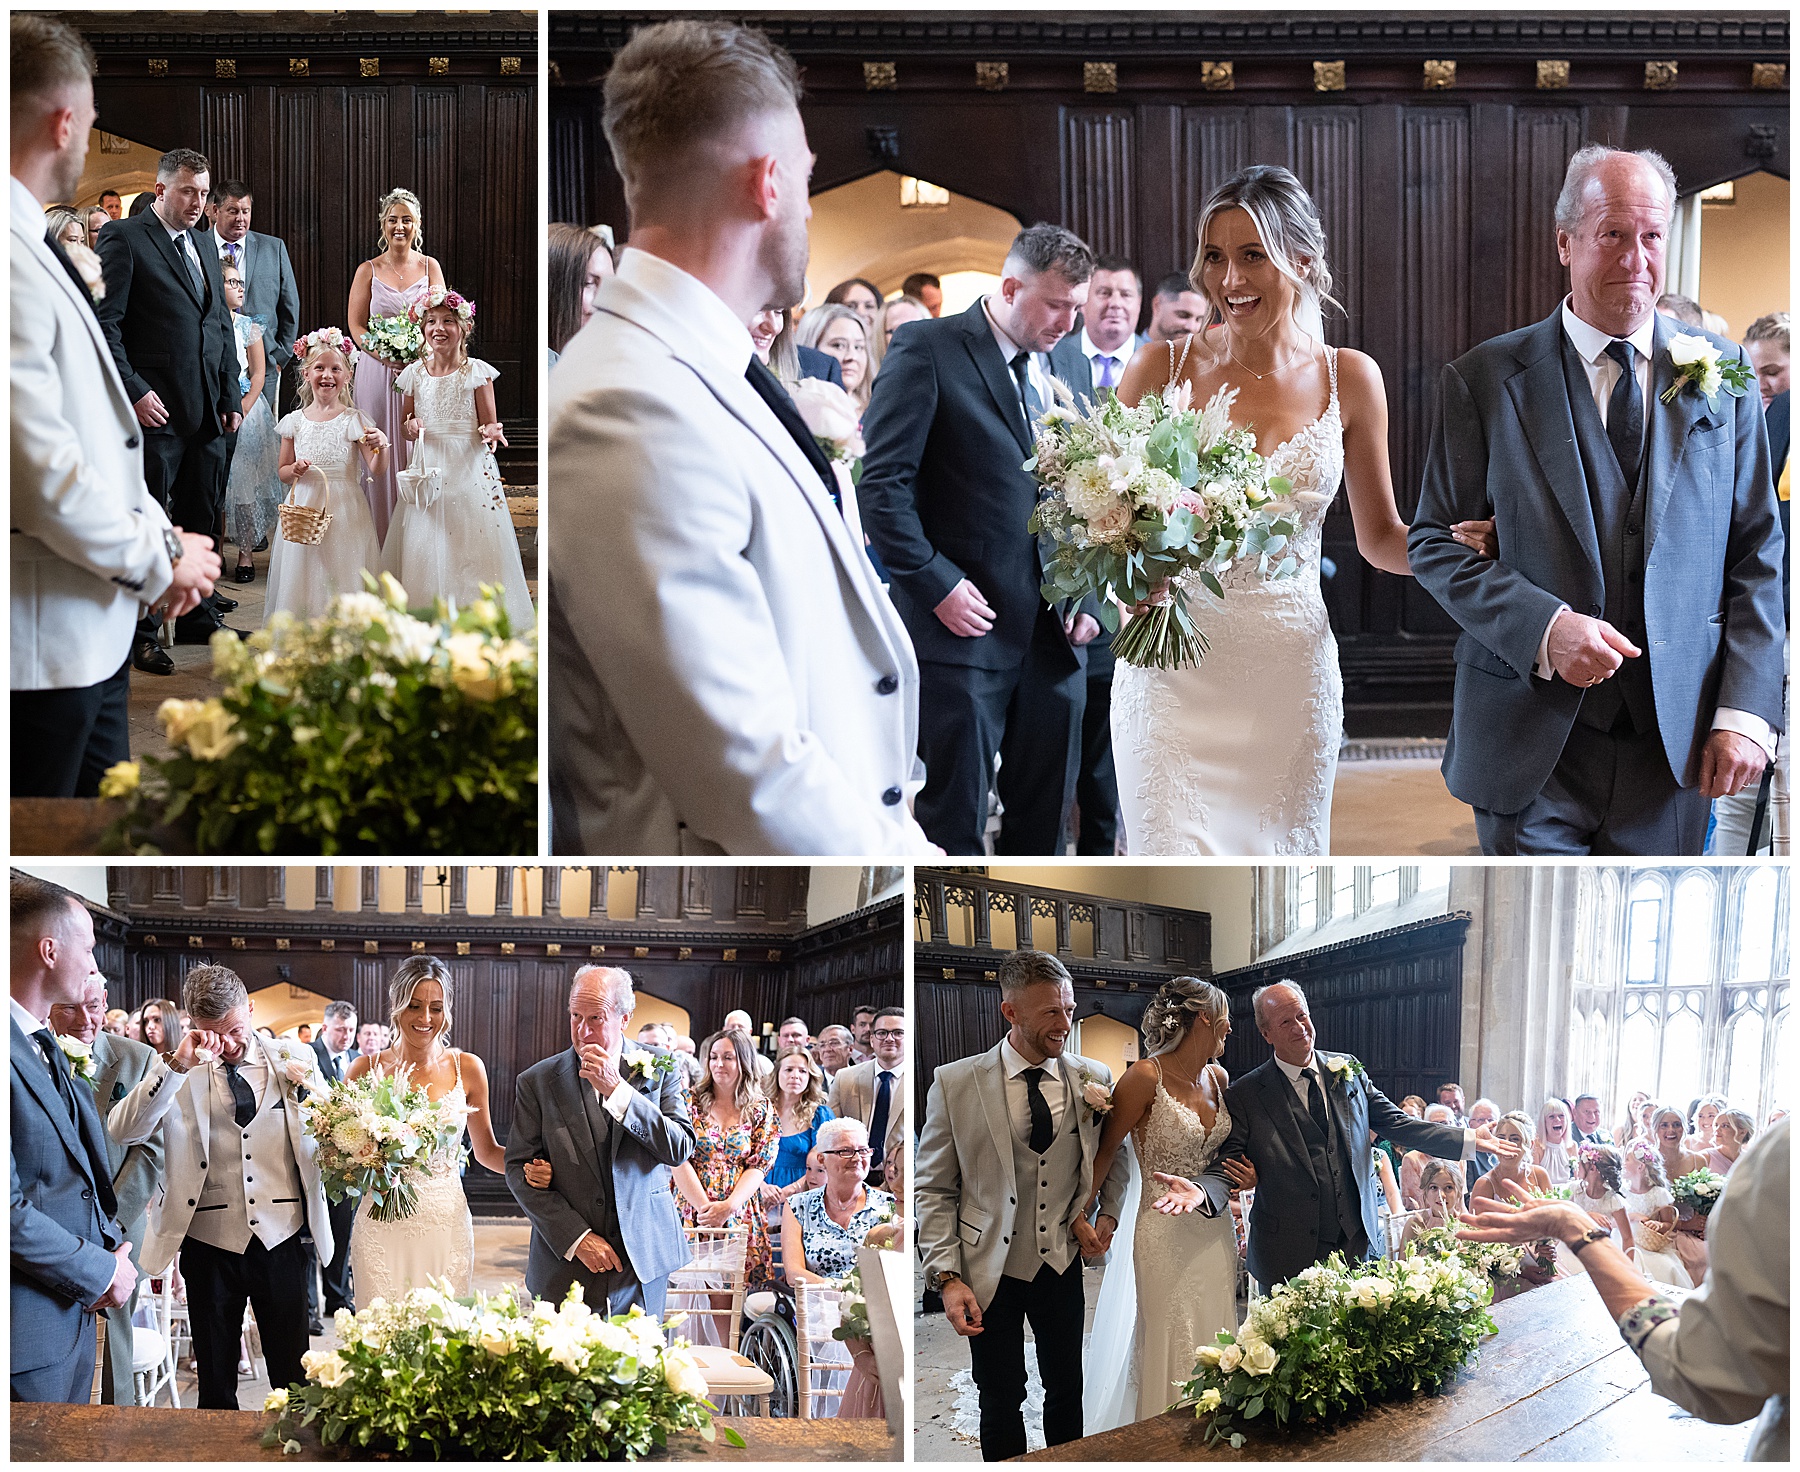 Bride and groom getting married at Athelhampton house in Dorset